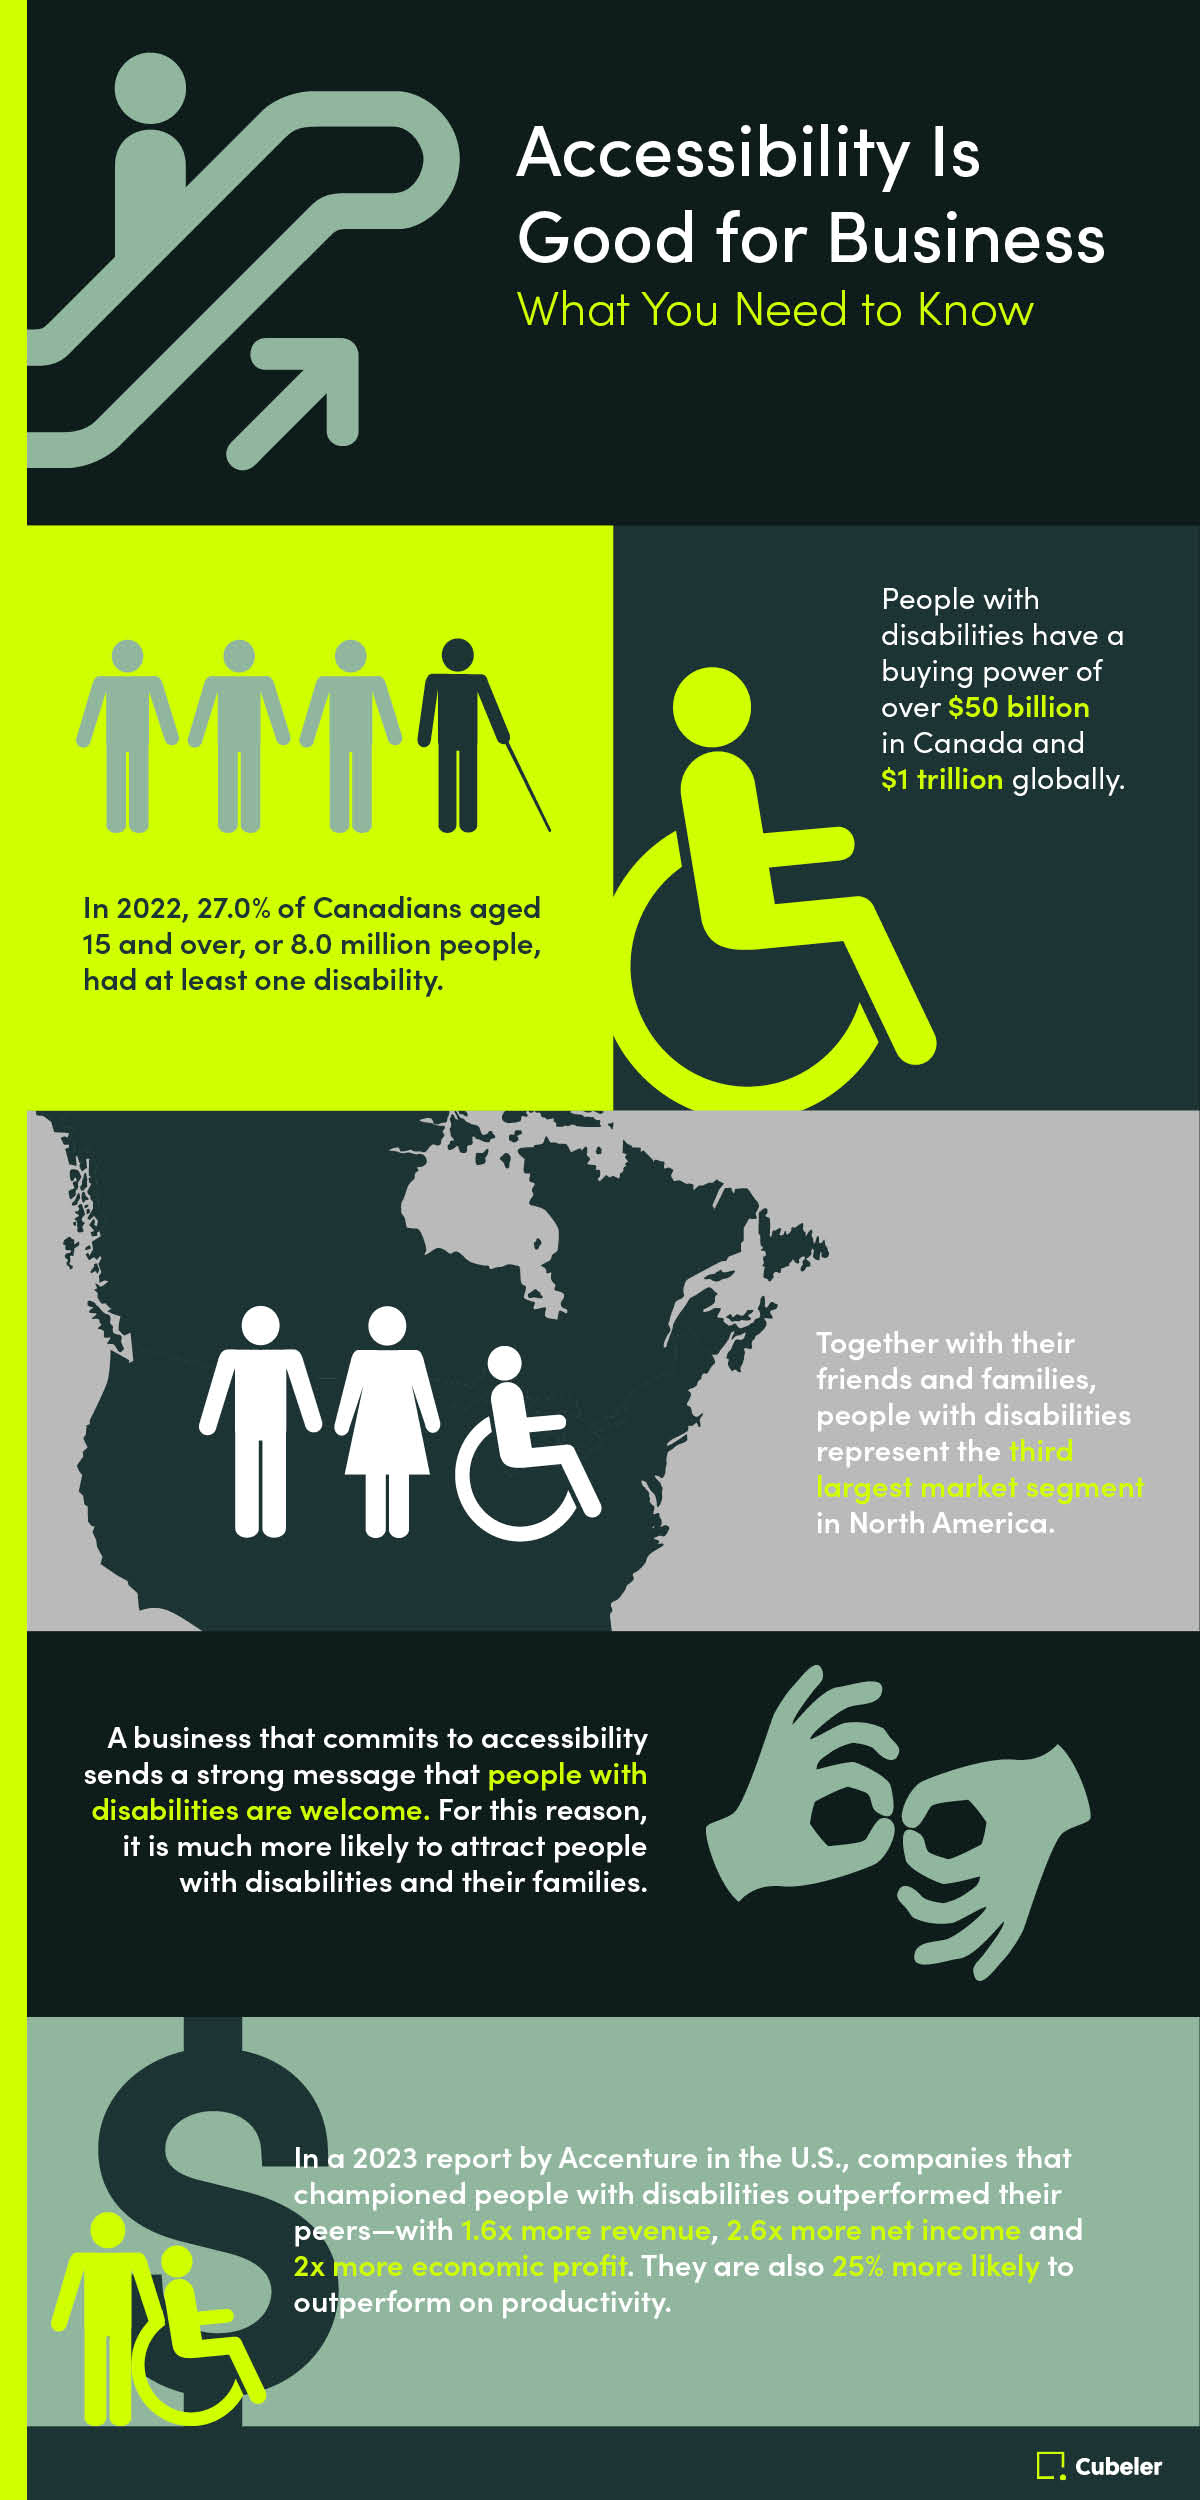 Accessibility is good for business